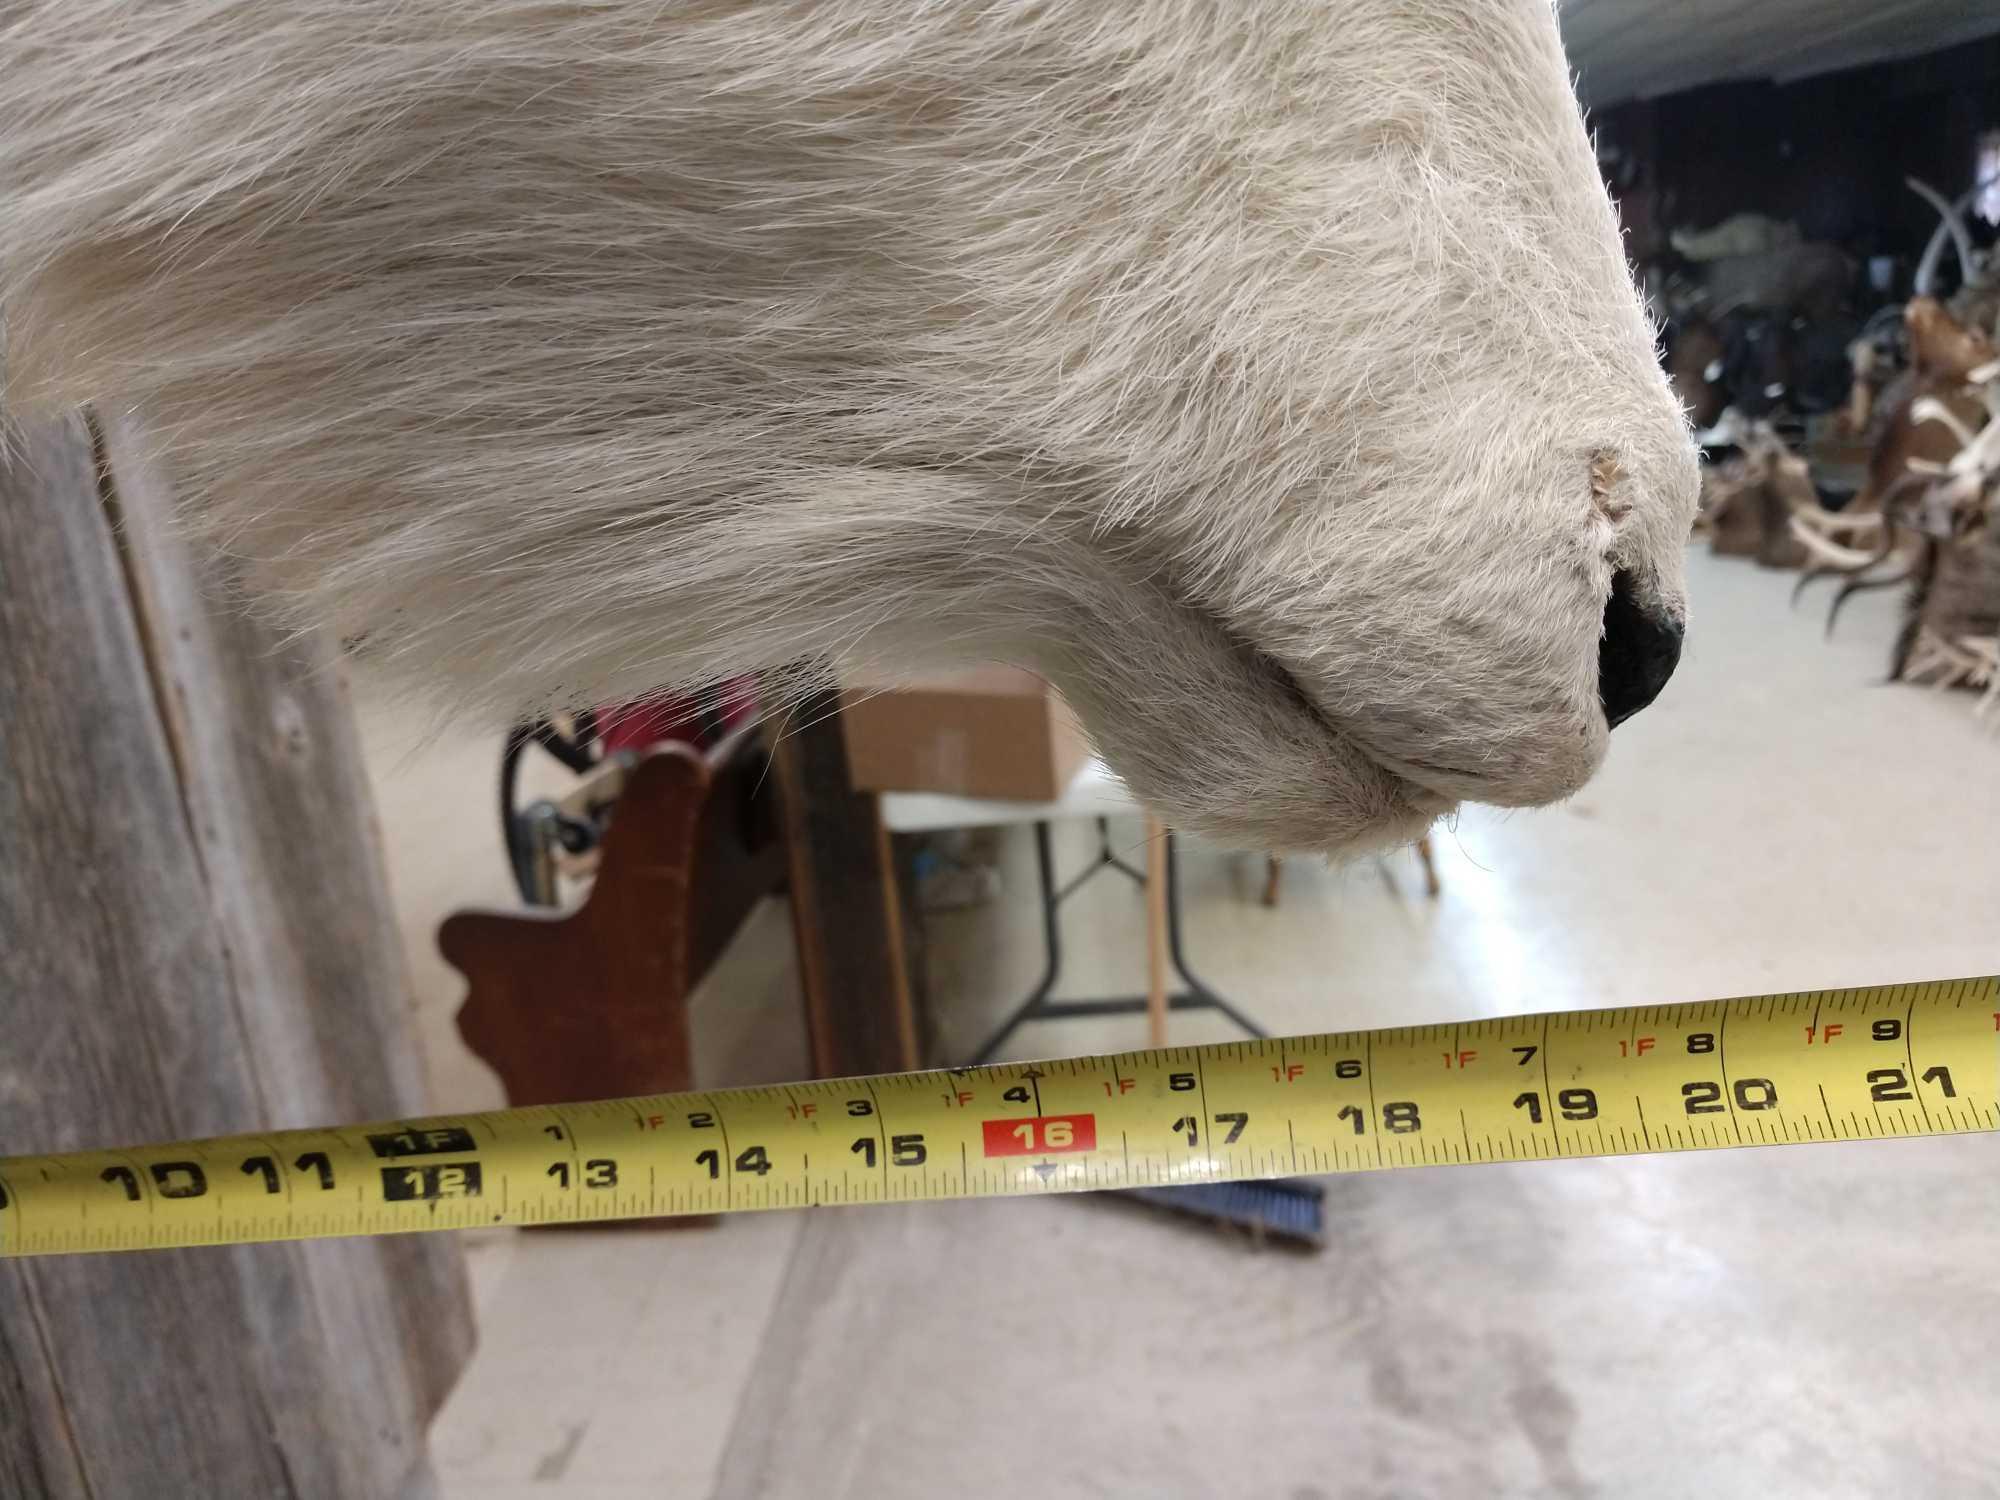 Mountain Goat Shoulder Mount Taxidermy